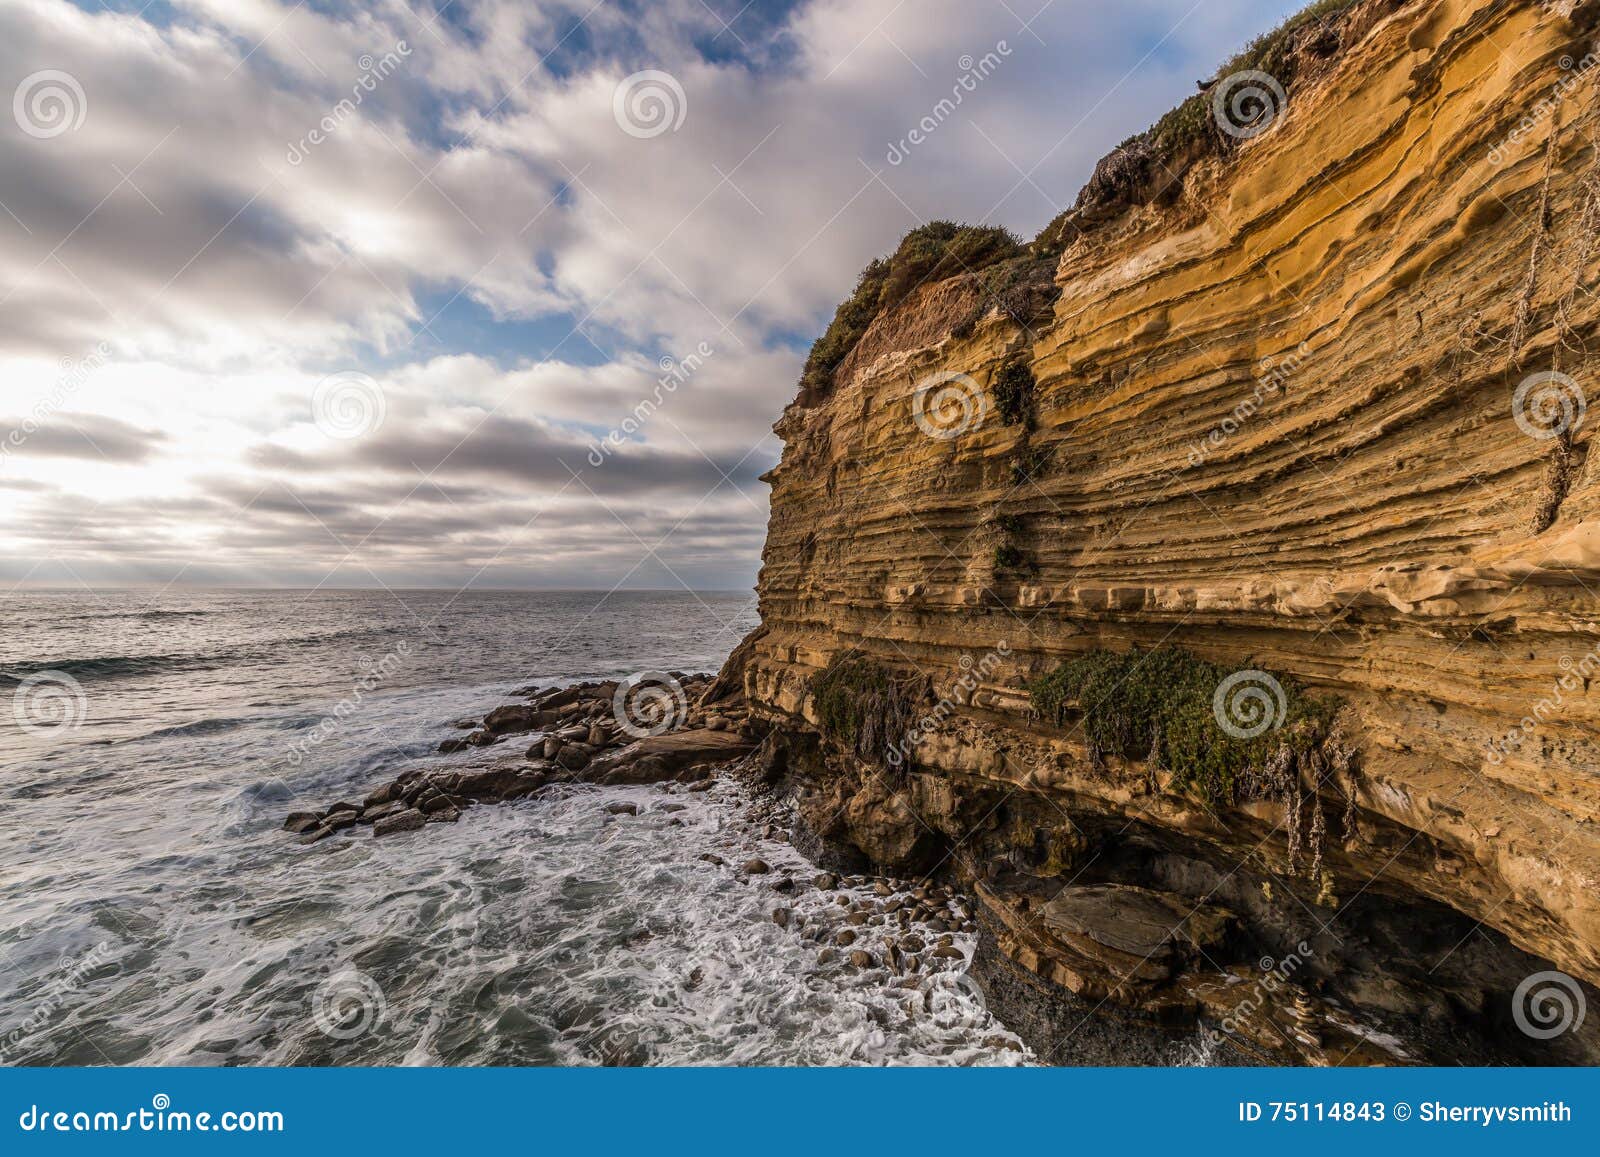 Rocky Cliff With Bushes, Bottom To Top View. Rocks After Blasting To ...